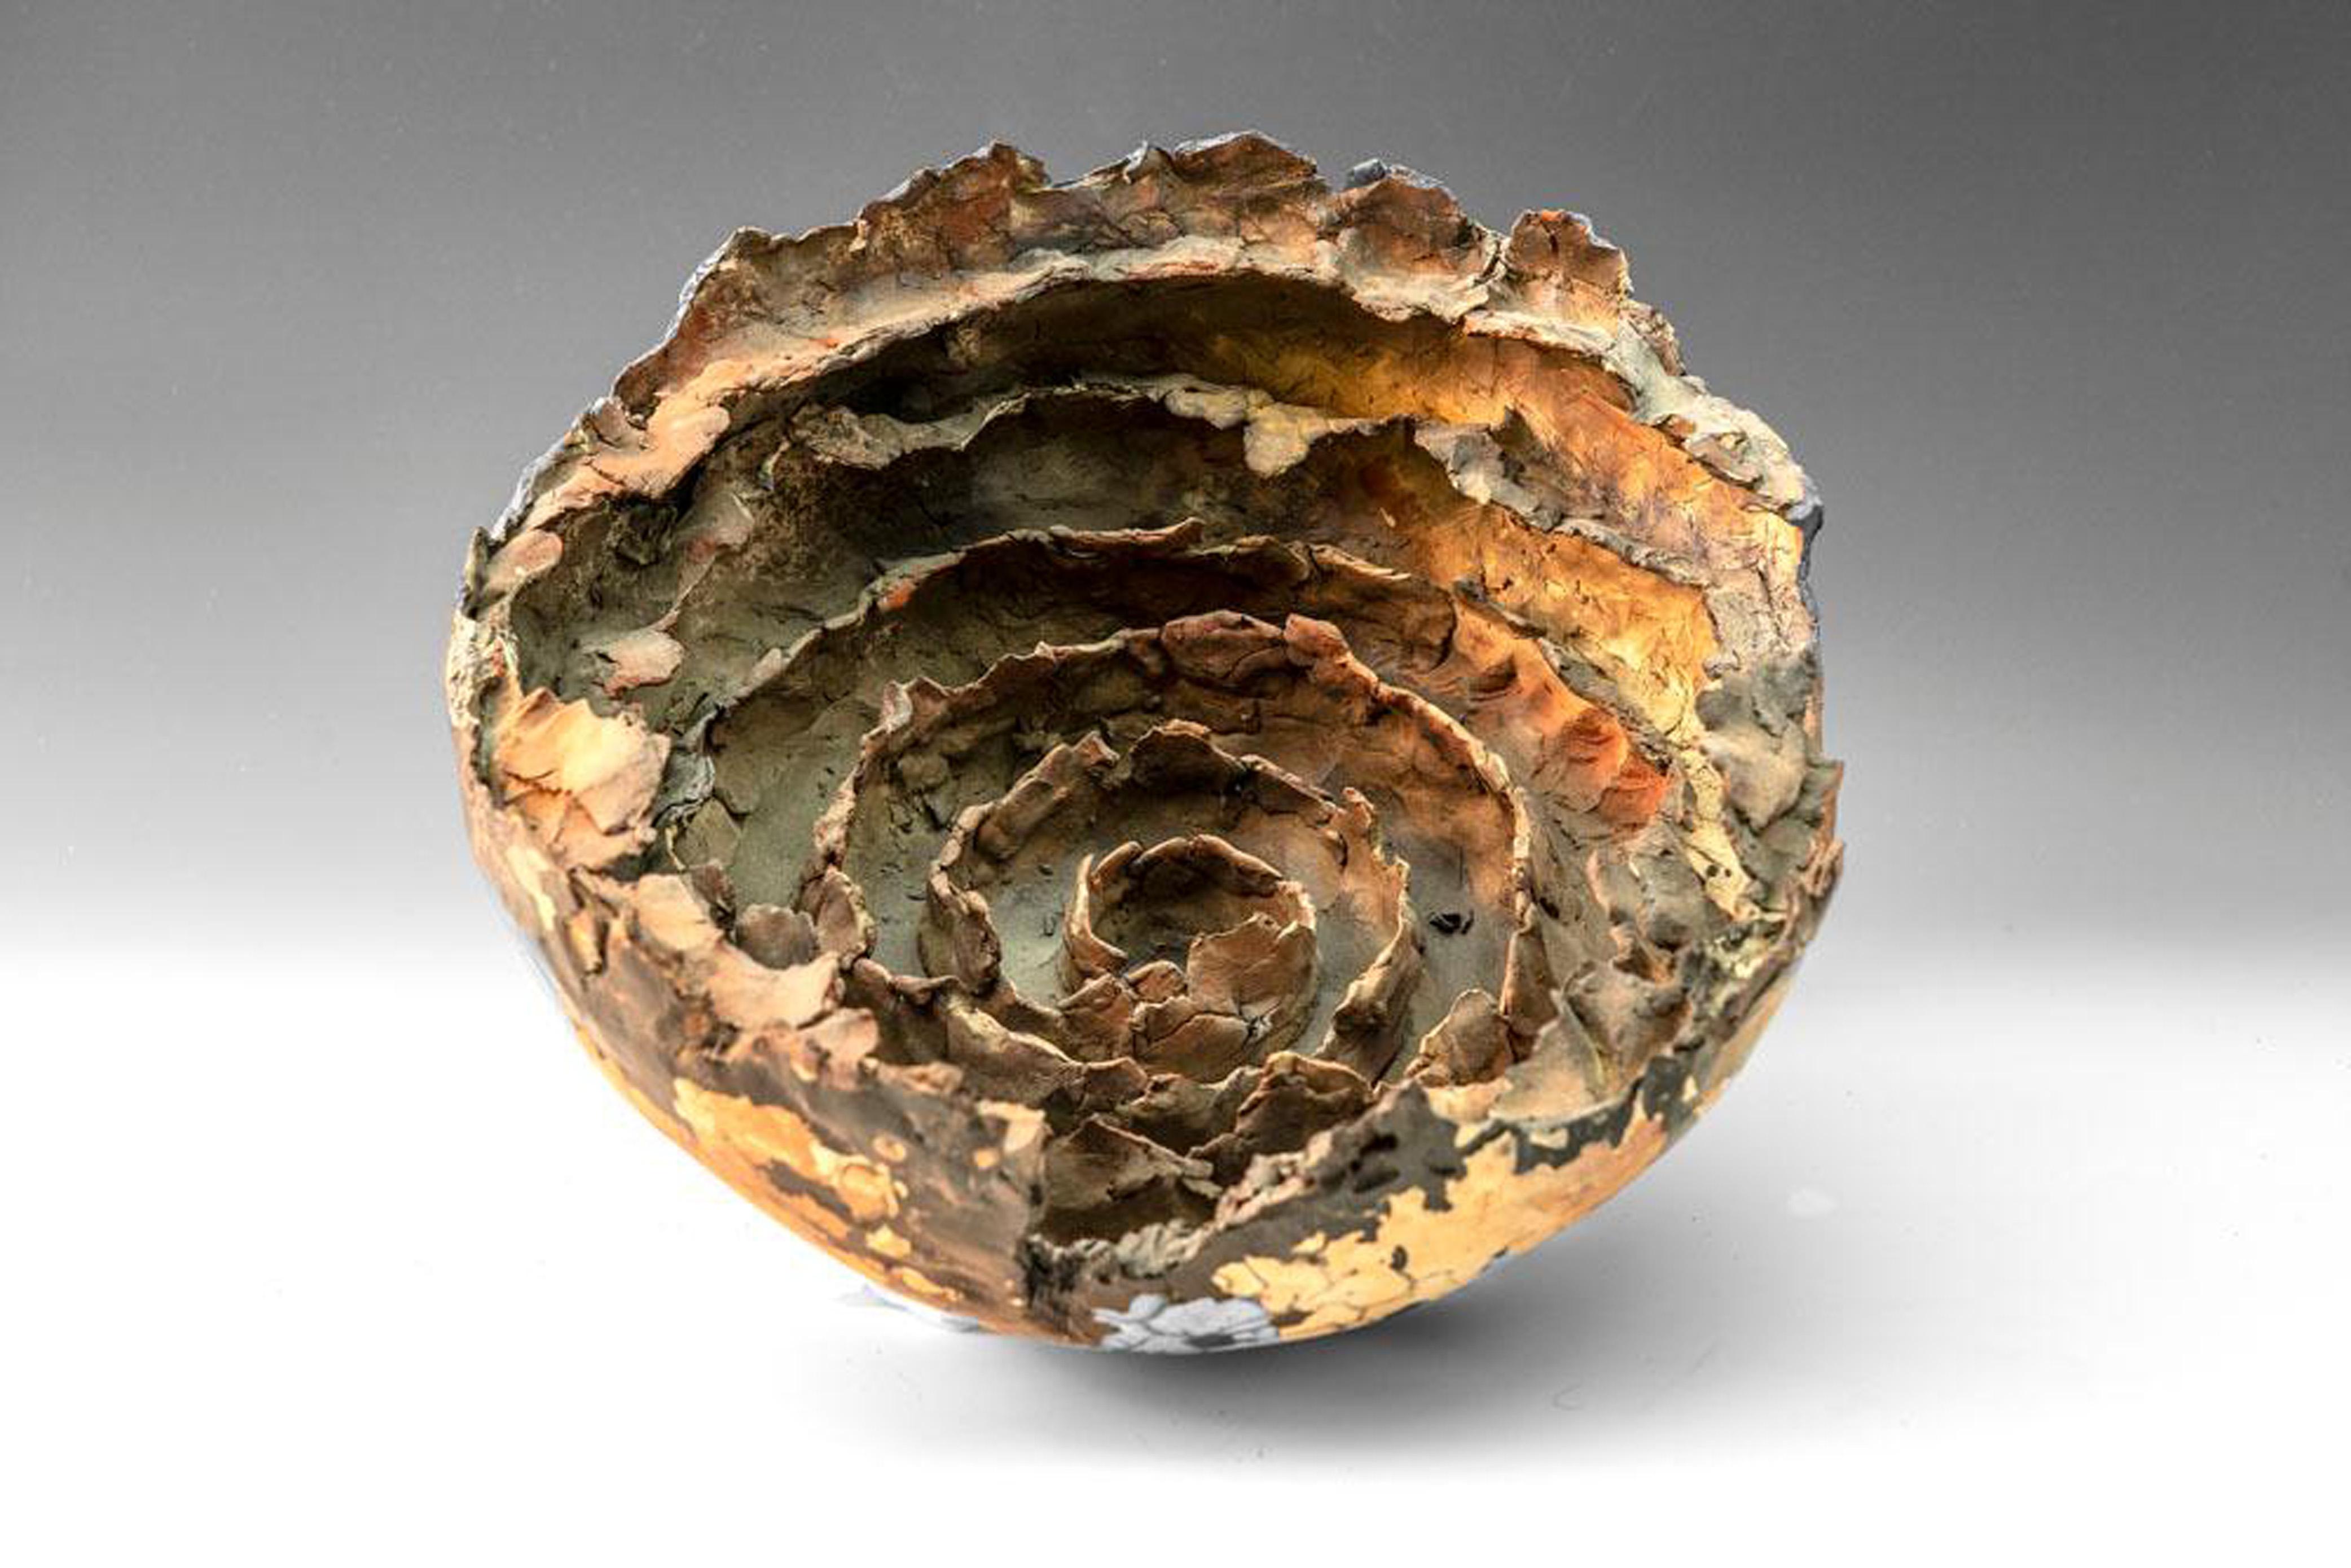 
Moon Crater, textured ceramic in golds and browns, embodies the essence of clay in its organic shapes that refer directly to the earth and nature. The artist says 